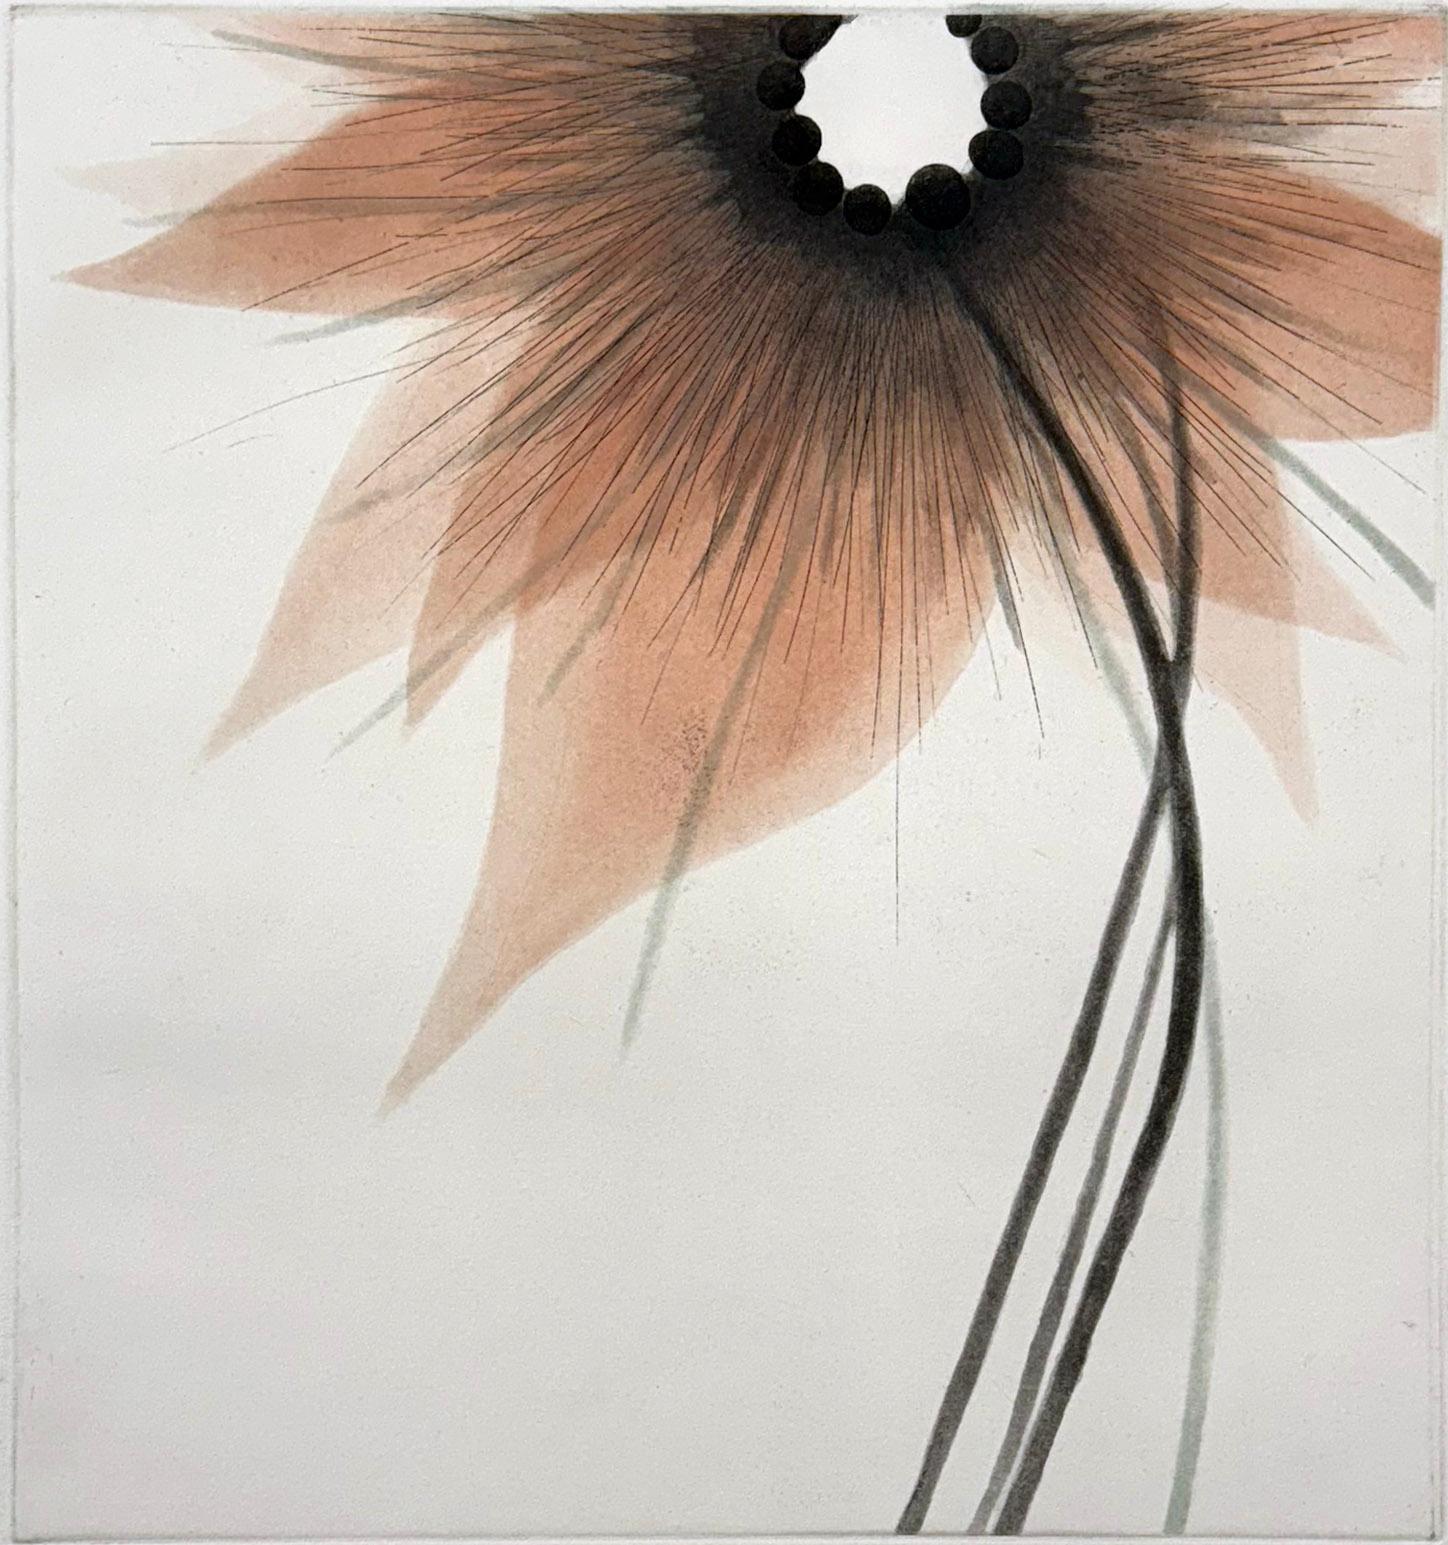 Medium: Etching,Aquatint
Image size: 12 × 11 
Sheet size: 22 × 18 in 
Edition of 30
Year: 2008
Signed and titled by the artist

While inspired by flowers, the blossom series shows the artist's penchant for abstract patterns. Signed, titled and